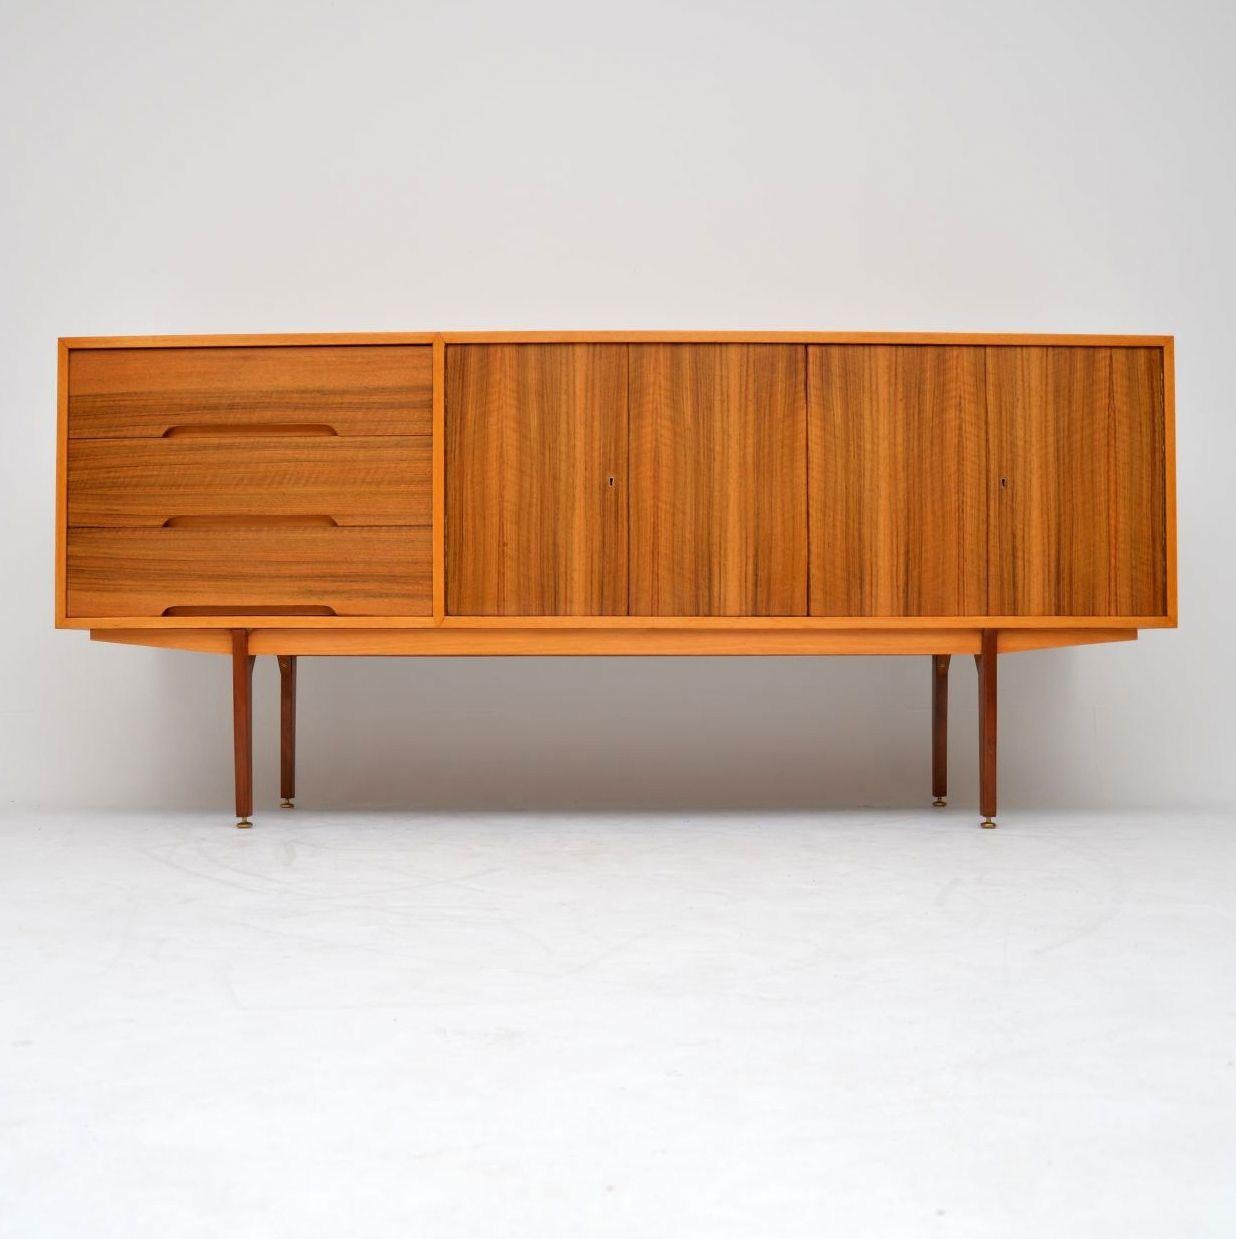 A very stylish and extremely well made vintage sideboard in walnut, this dates from the 1950s. It has a fantastic minimal design, with a beautiful color and lovely grain patterns. The quality of construction is evident throughout, from the finely